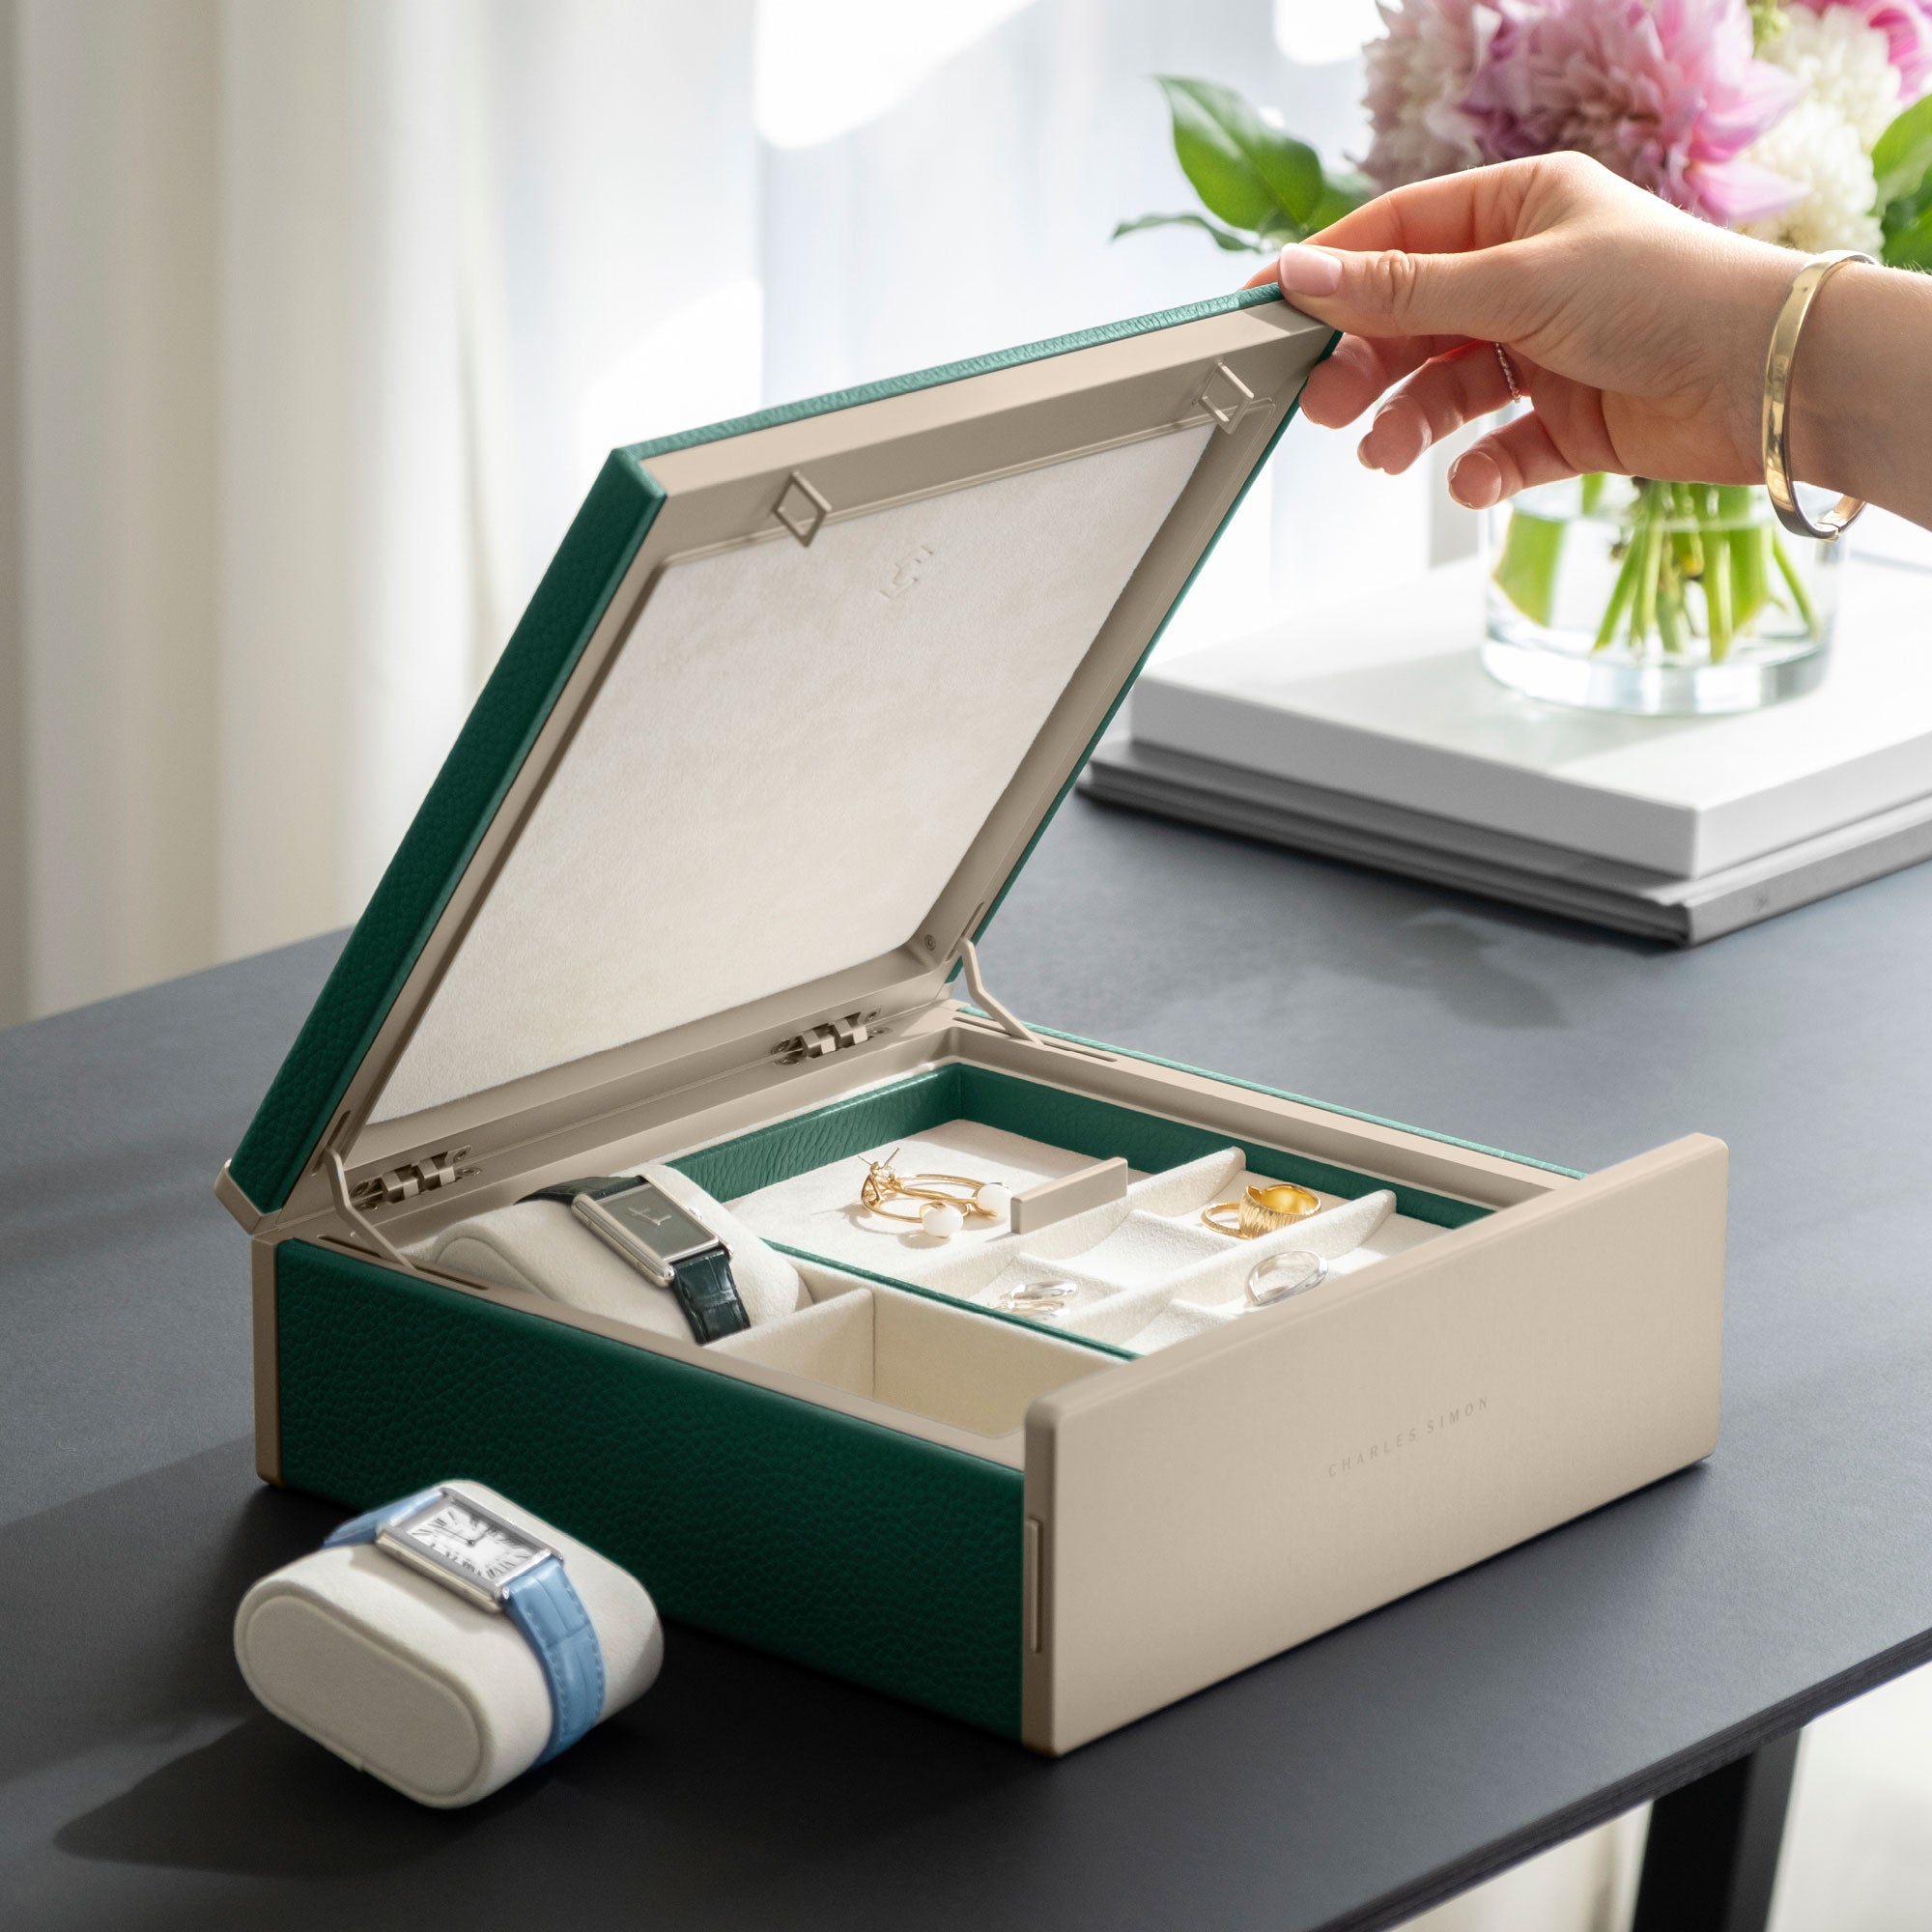 Woman opening her jewelry collection stored and organized in the gold and emerald Taylor 2 Watch box.